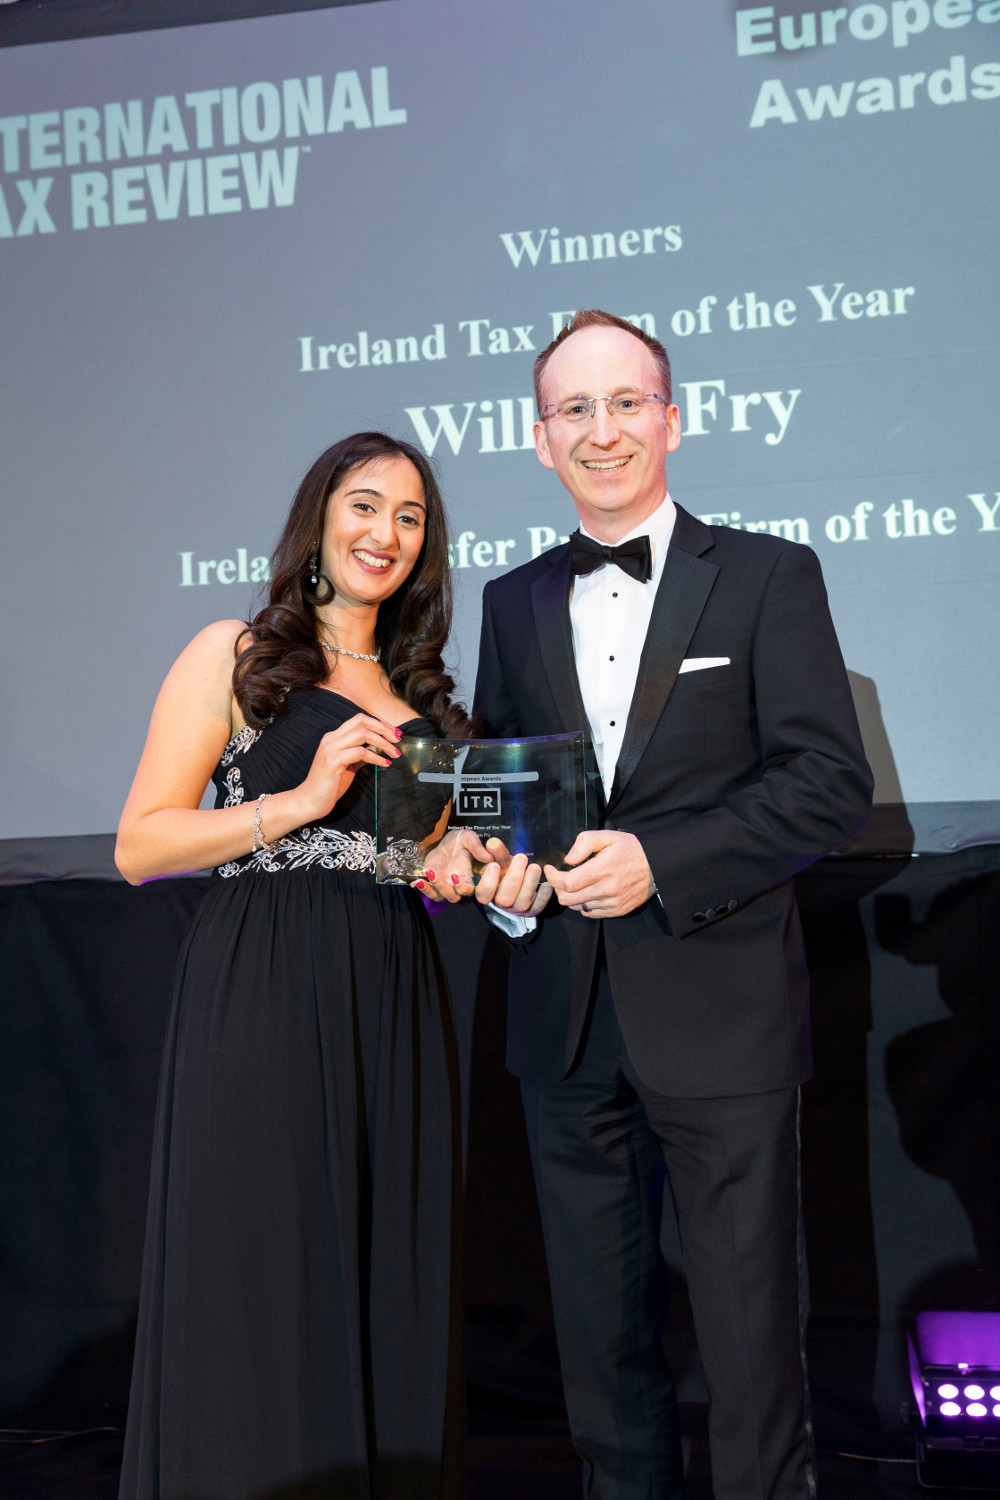 Double award win for William Fry tax team